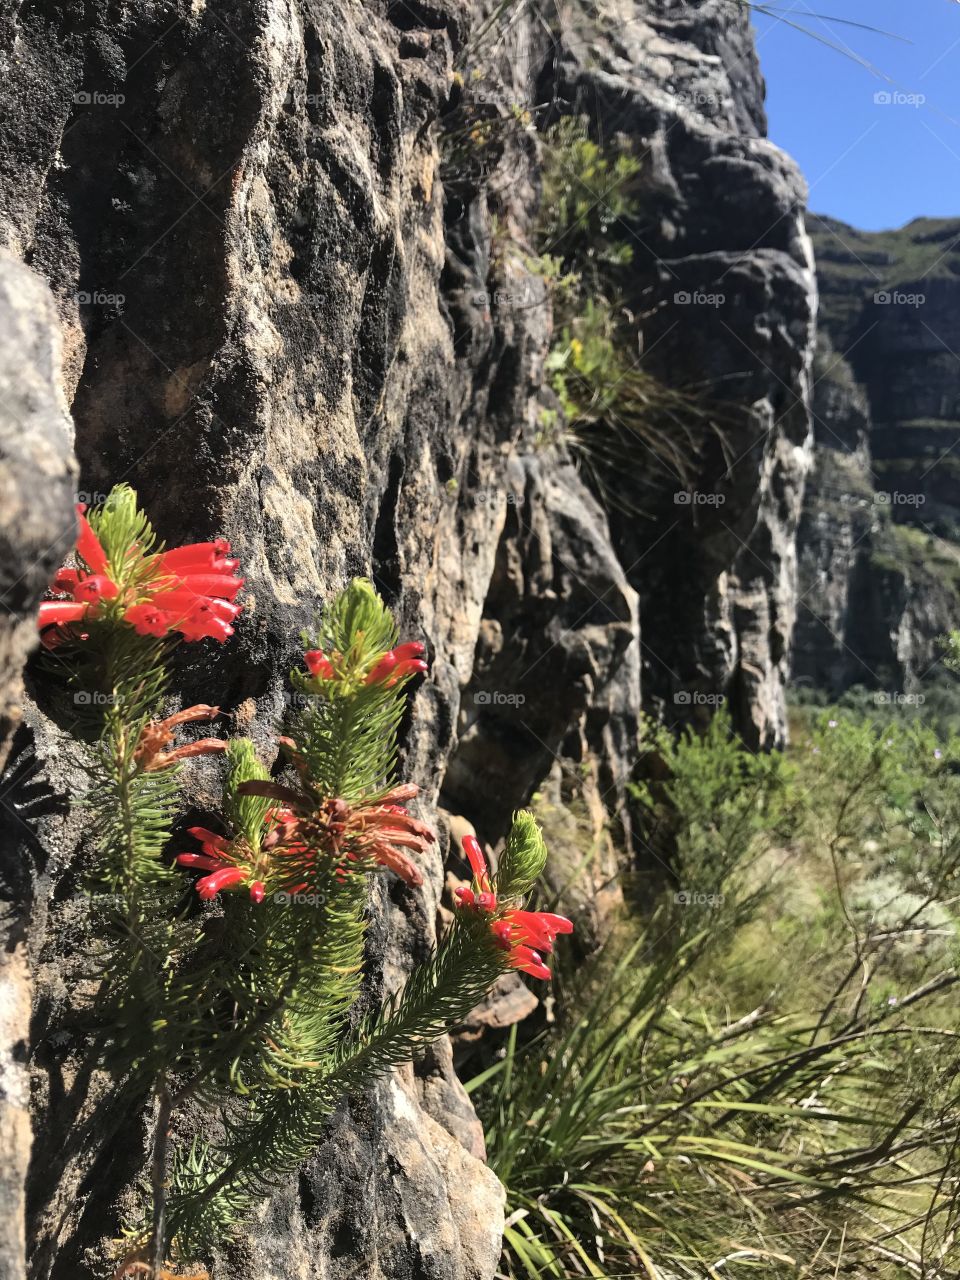 Beautiful red wild fynbos flowers decorating the rocky mountain. Only visible to the ones willing to hike up the Helderberg mountain in Cape Town